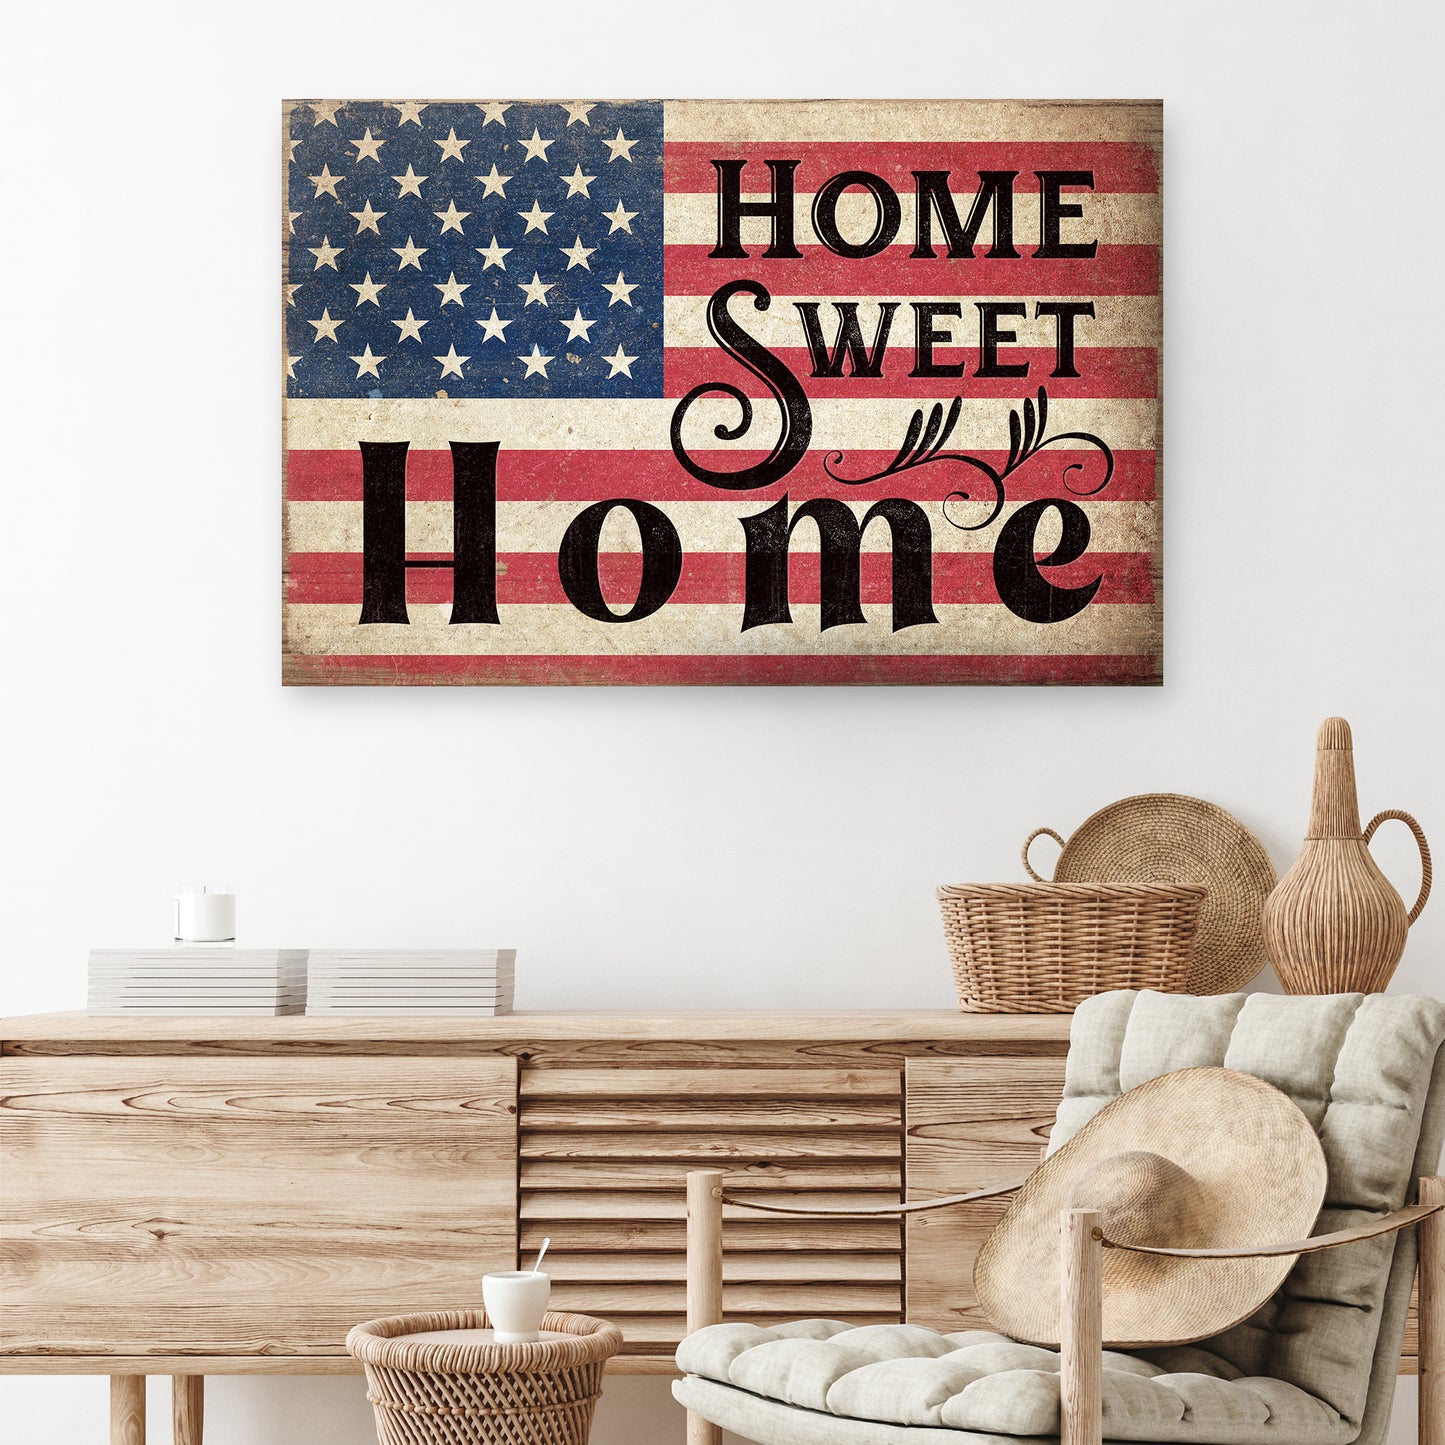 Home Sweet Home Sign IV - Image by Tailored Canvases